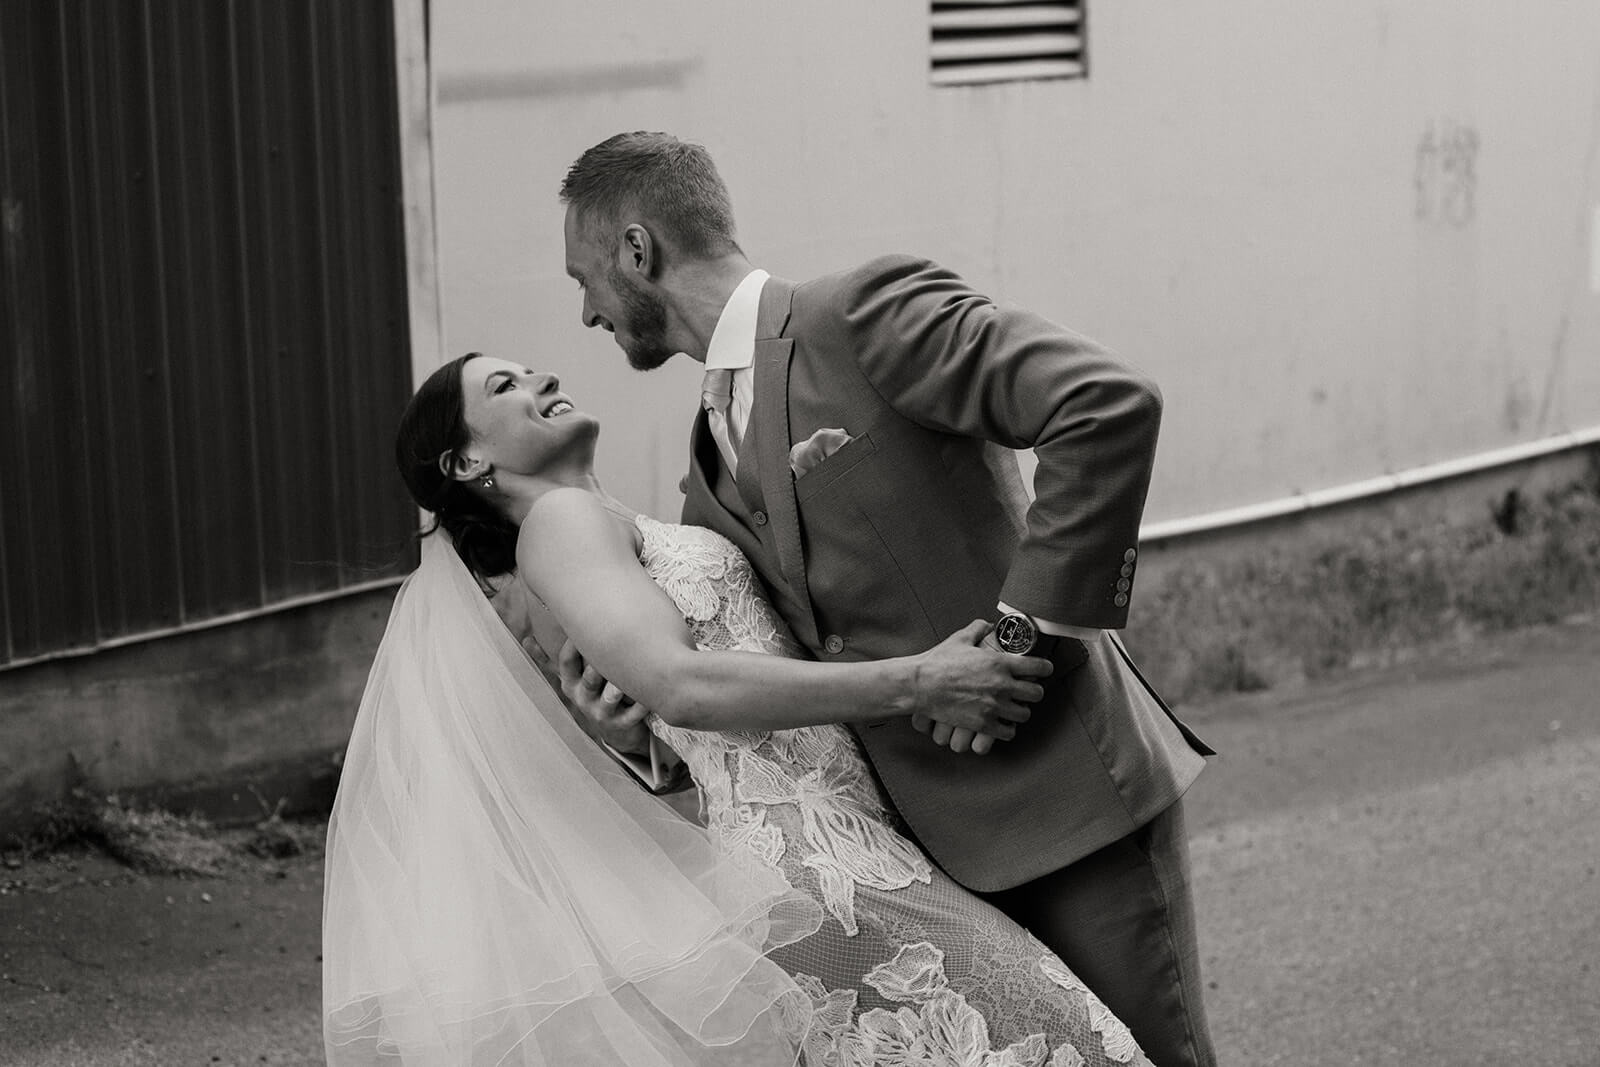 Groom dips bride back for couple portraits at industrial wedding